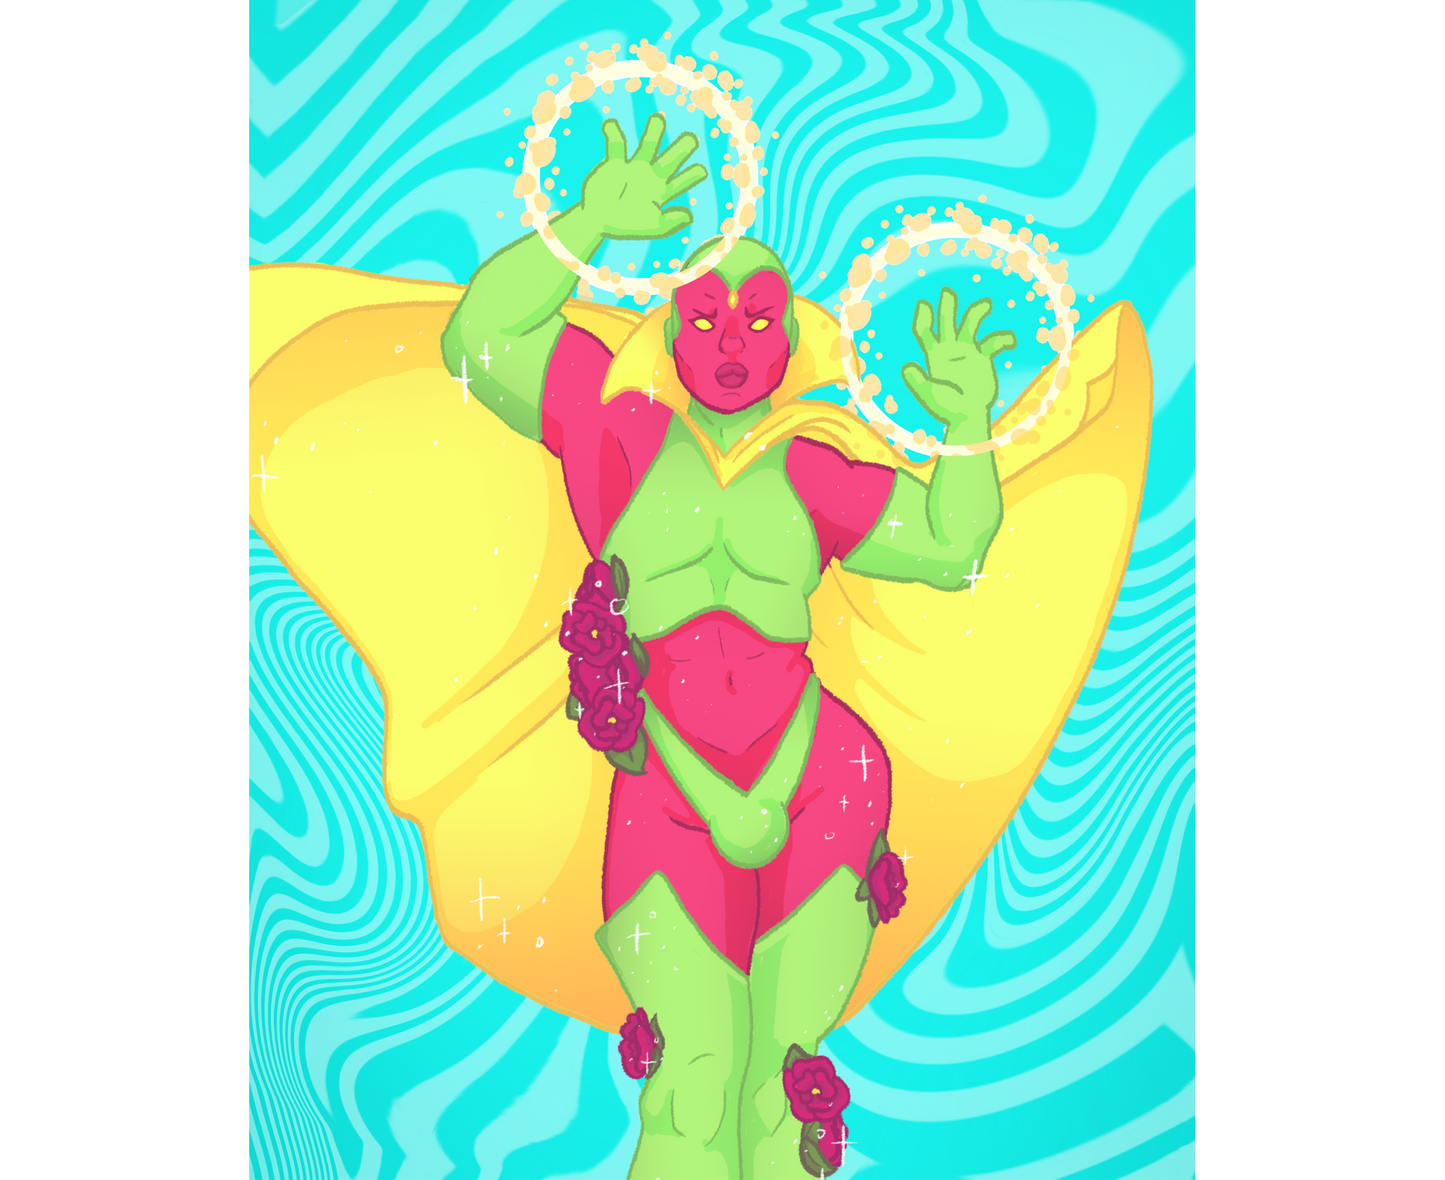 "Visitch" 8 x 10 inch Art Print. Sexy Super Swap of Vision as Scarlet Witch.